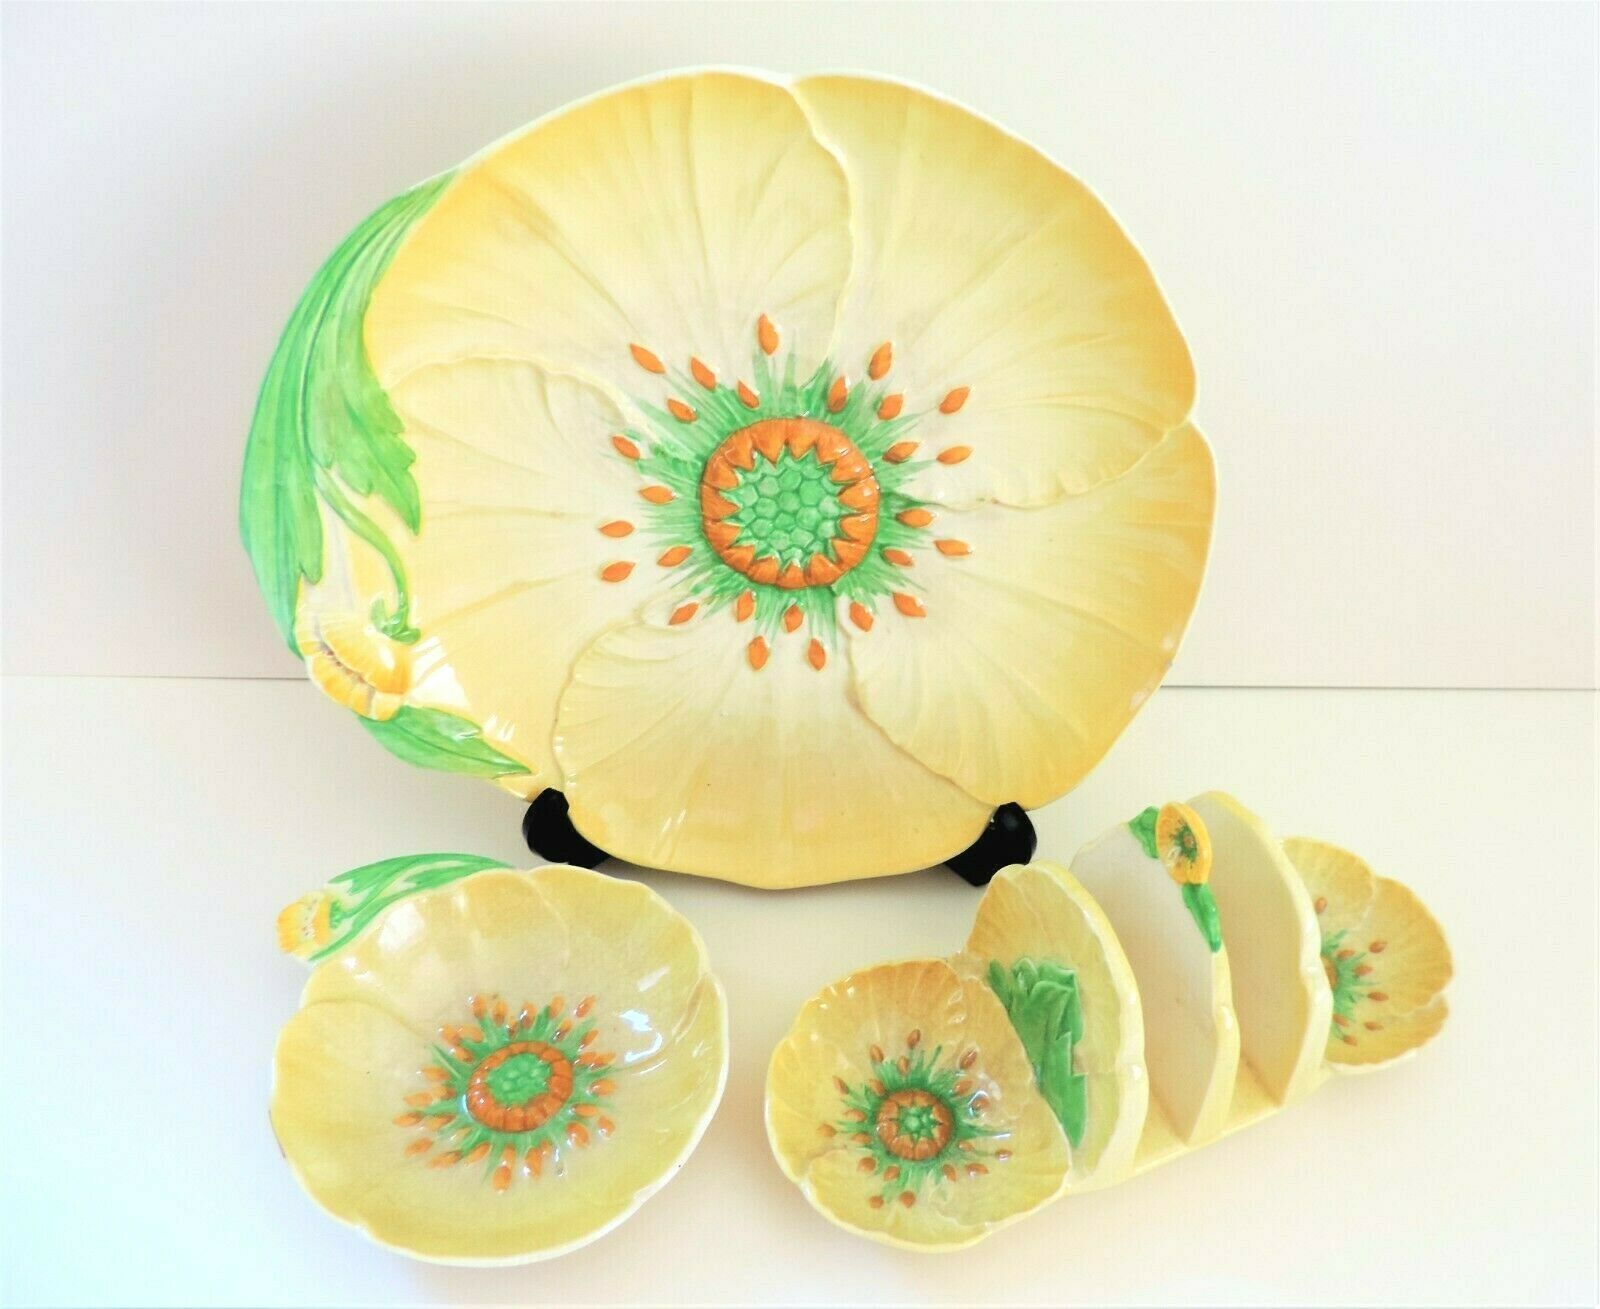 Vintage Carlton Ware Toast Rack & Plate Set Yellow Buttercup Pattern - Image 2 of 4